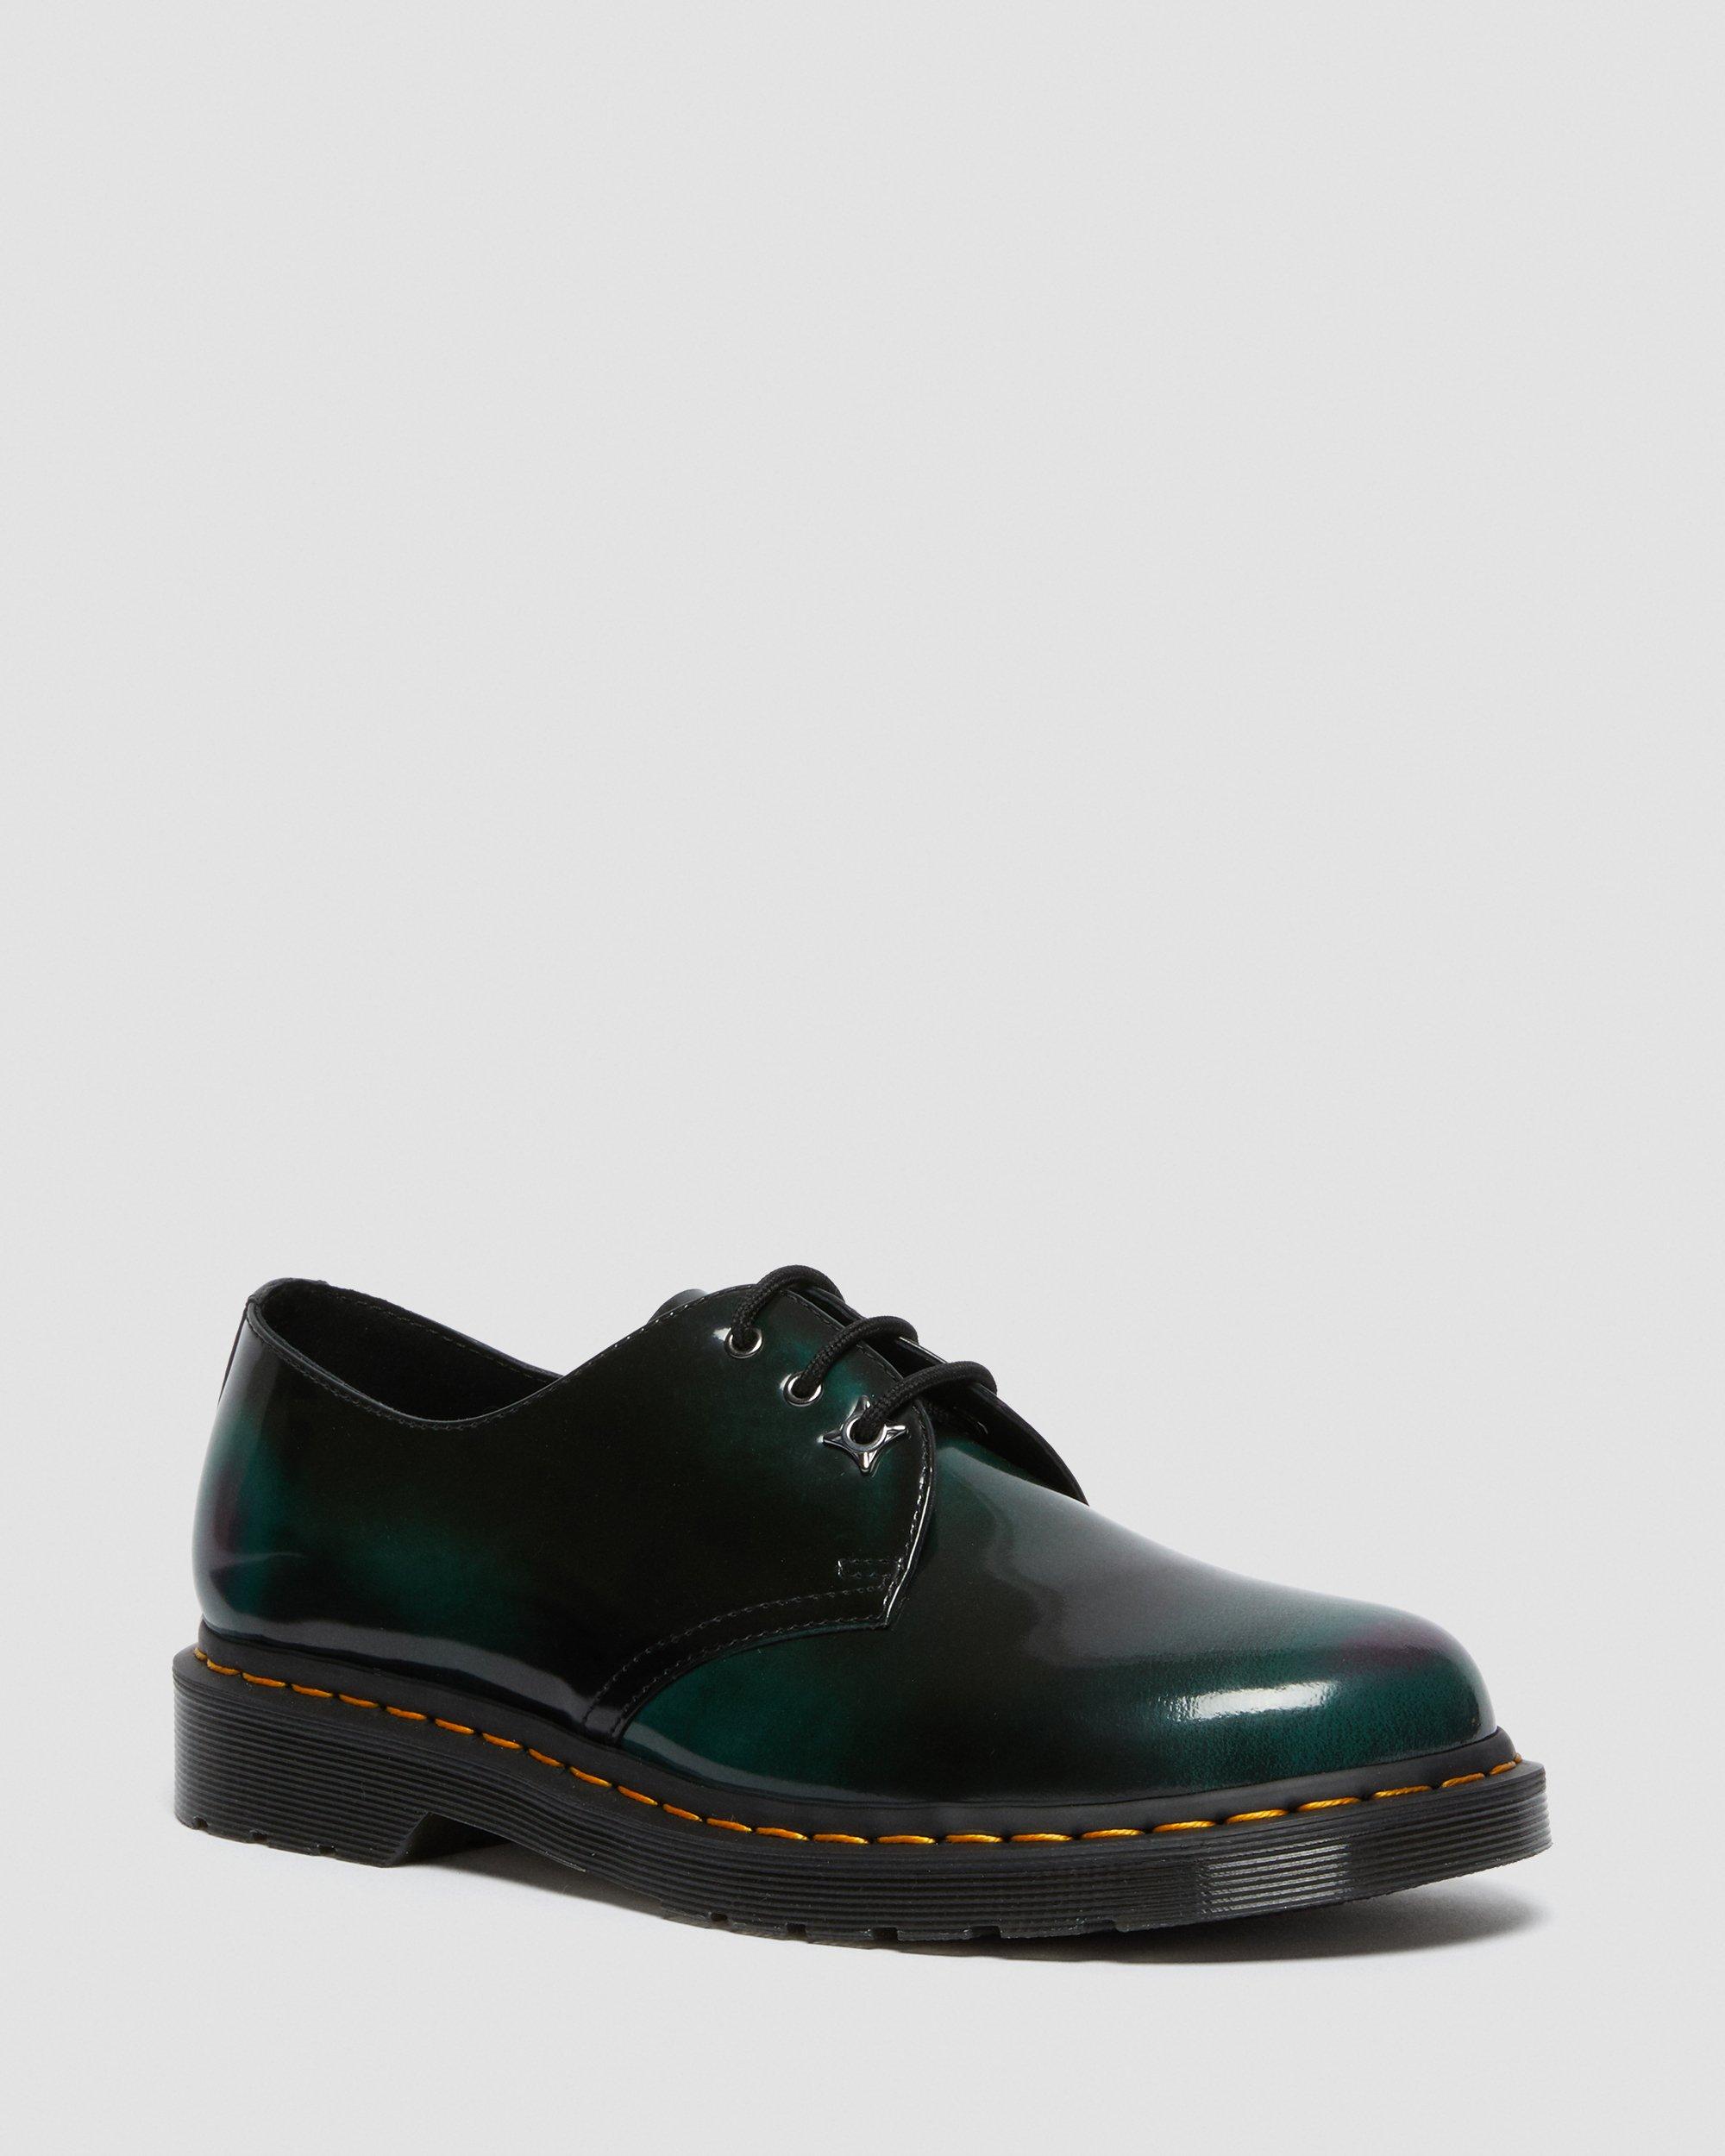 1461 Multi Arcadia Leather Oxford Shoes | Dr. Martens